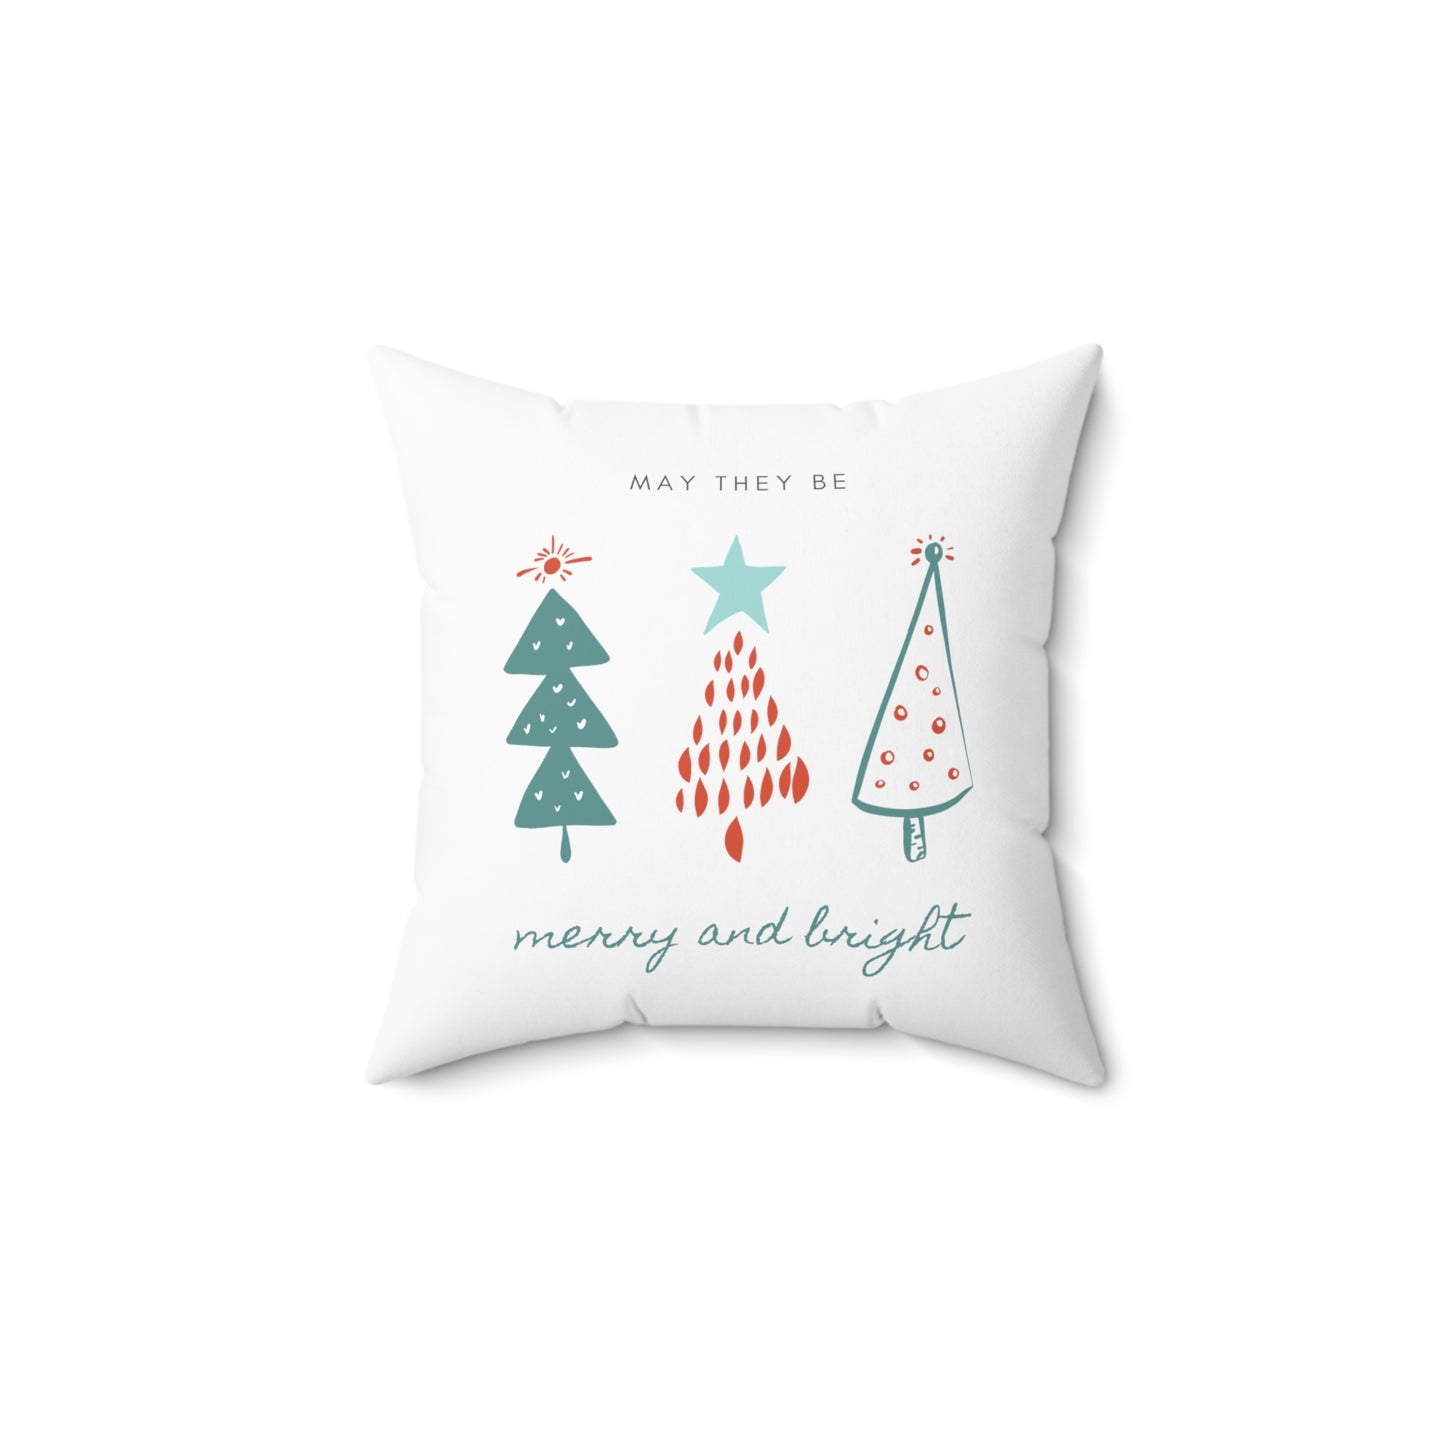 Happy Holidays Printed Spun Polyester Square Pillow